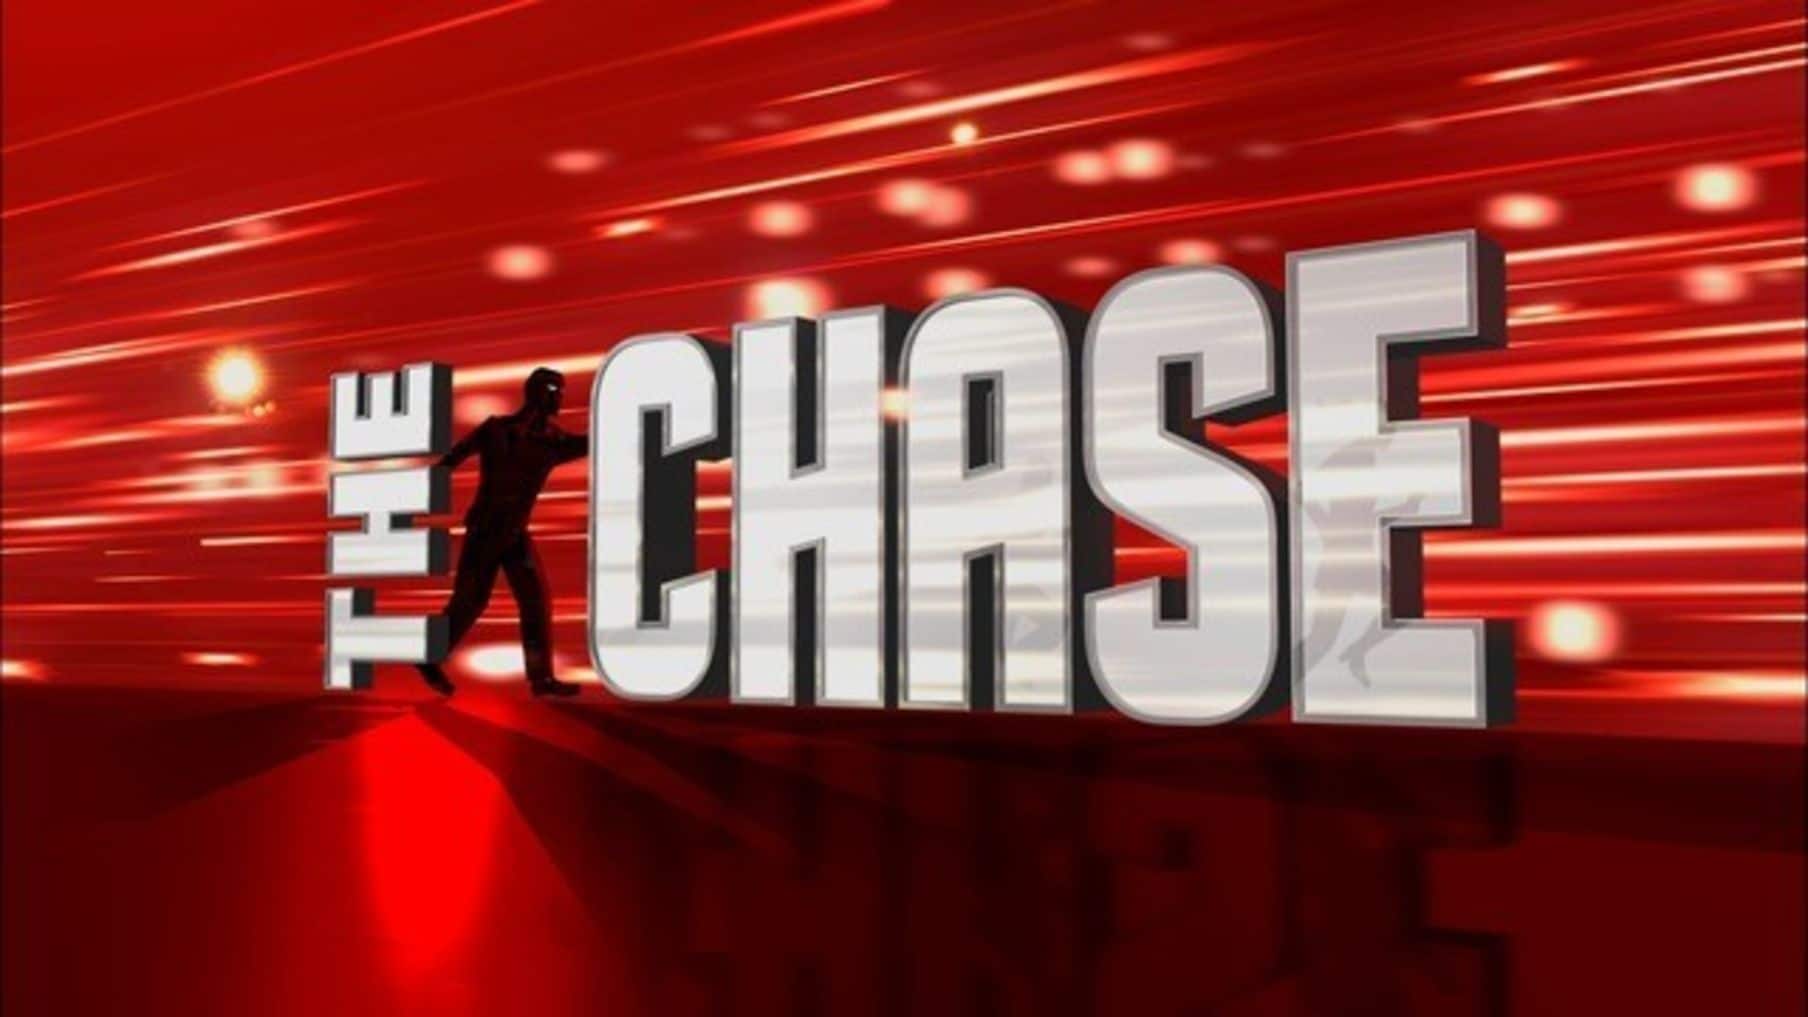 Who's on Celebrity Chase tonight? Line up of celebrities on latest